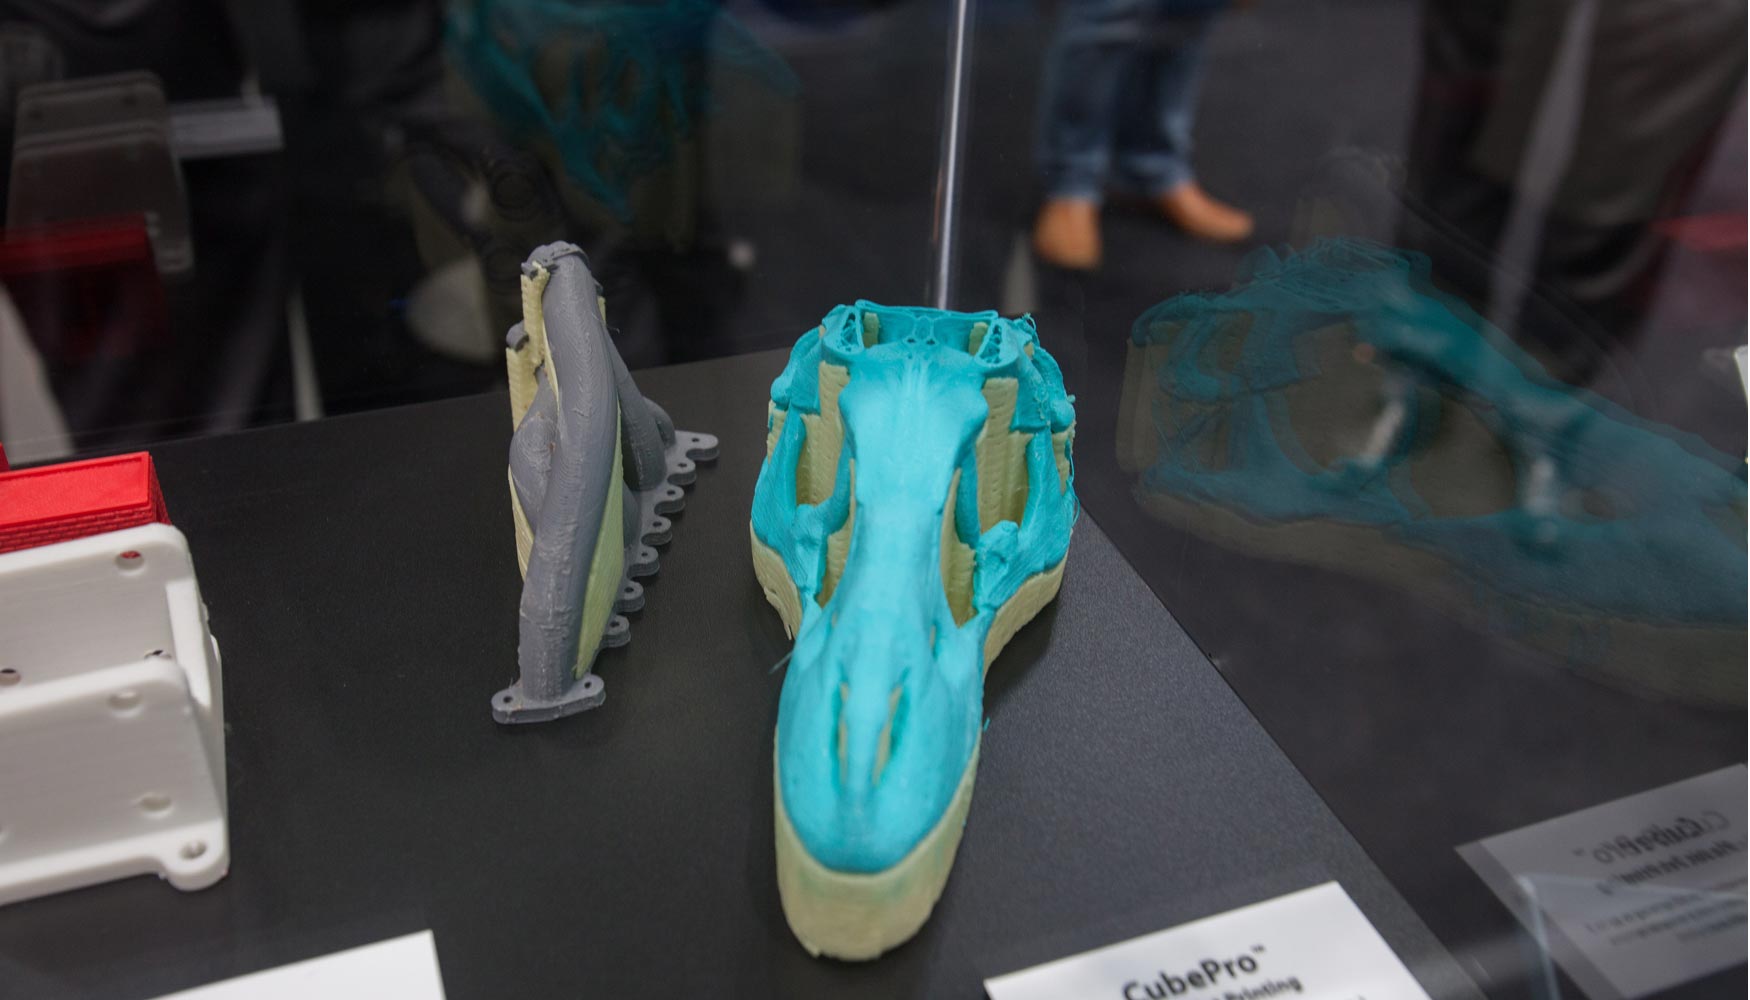 Euromold 2015, 3D Systems